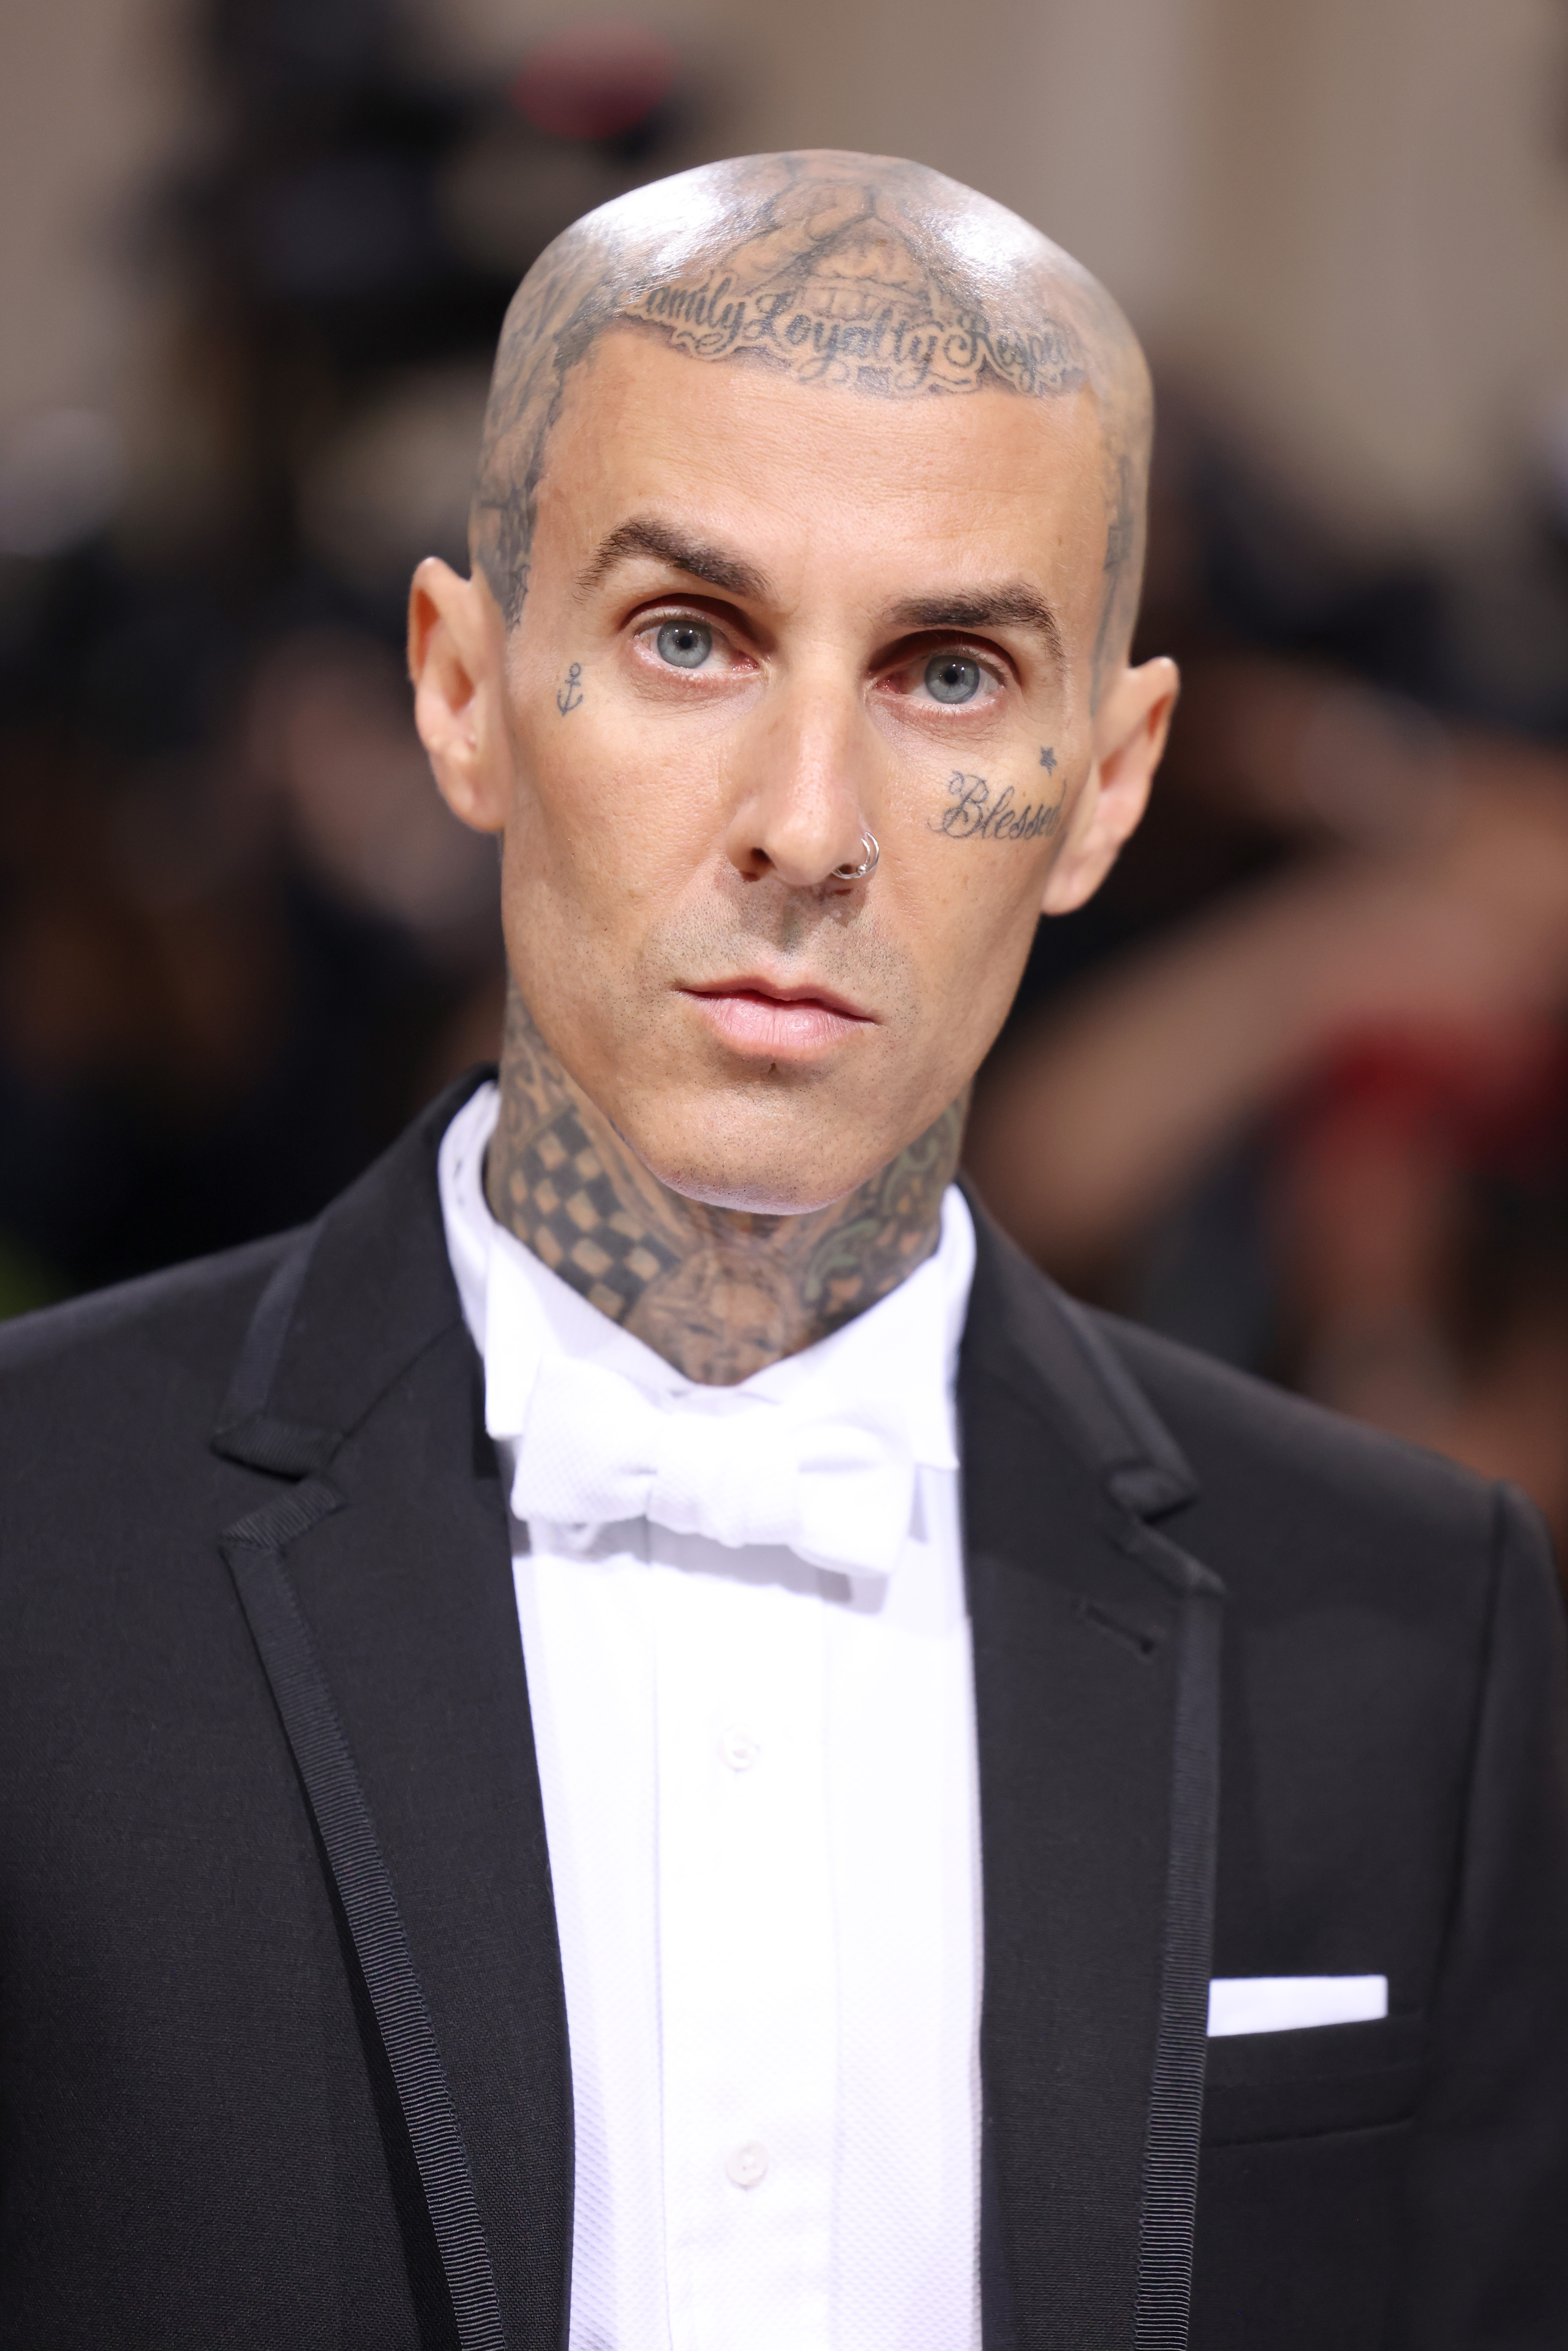 Critics bashed Alabama's dad Travis Barker for allowing his daughter to pose in inappropriate outfits on social media